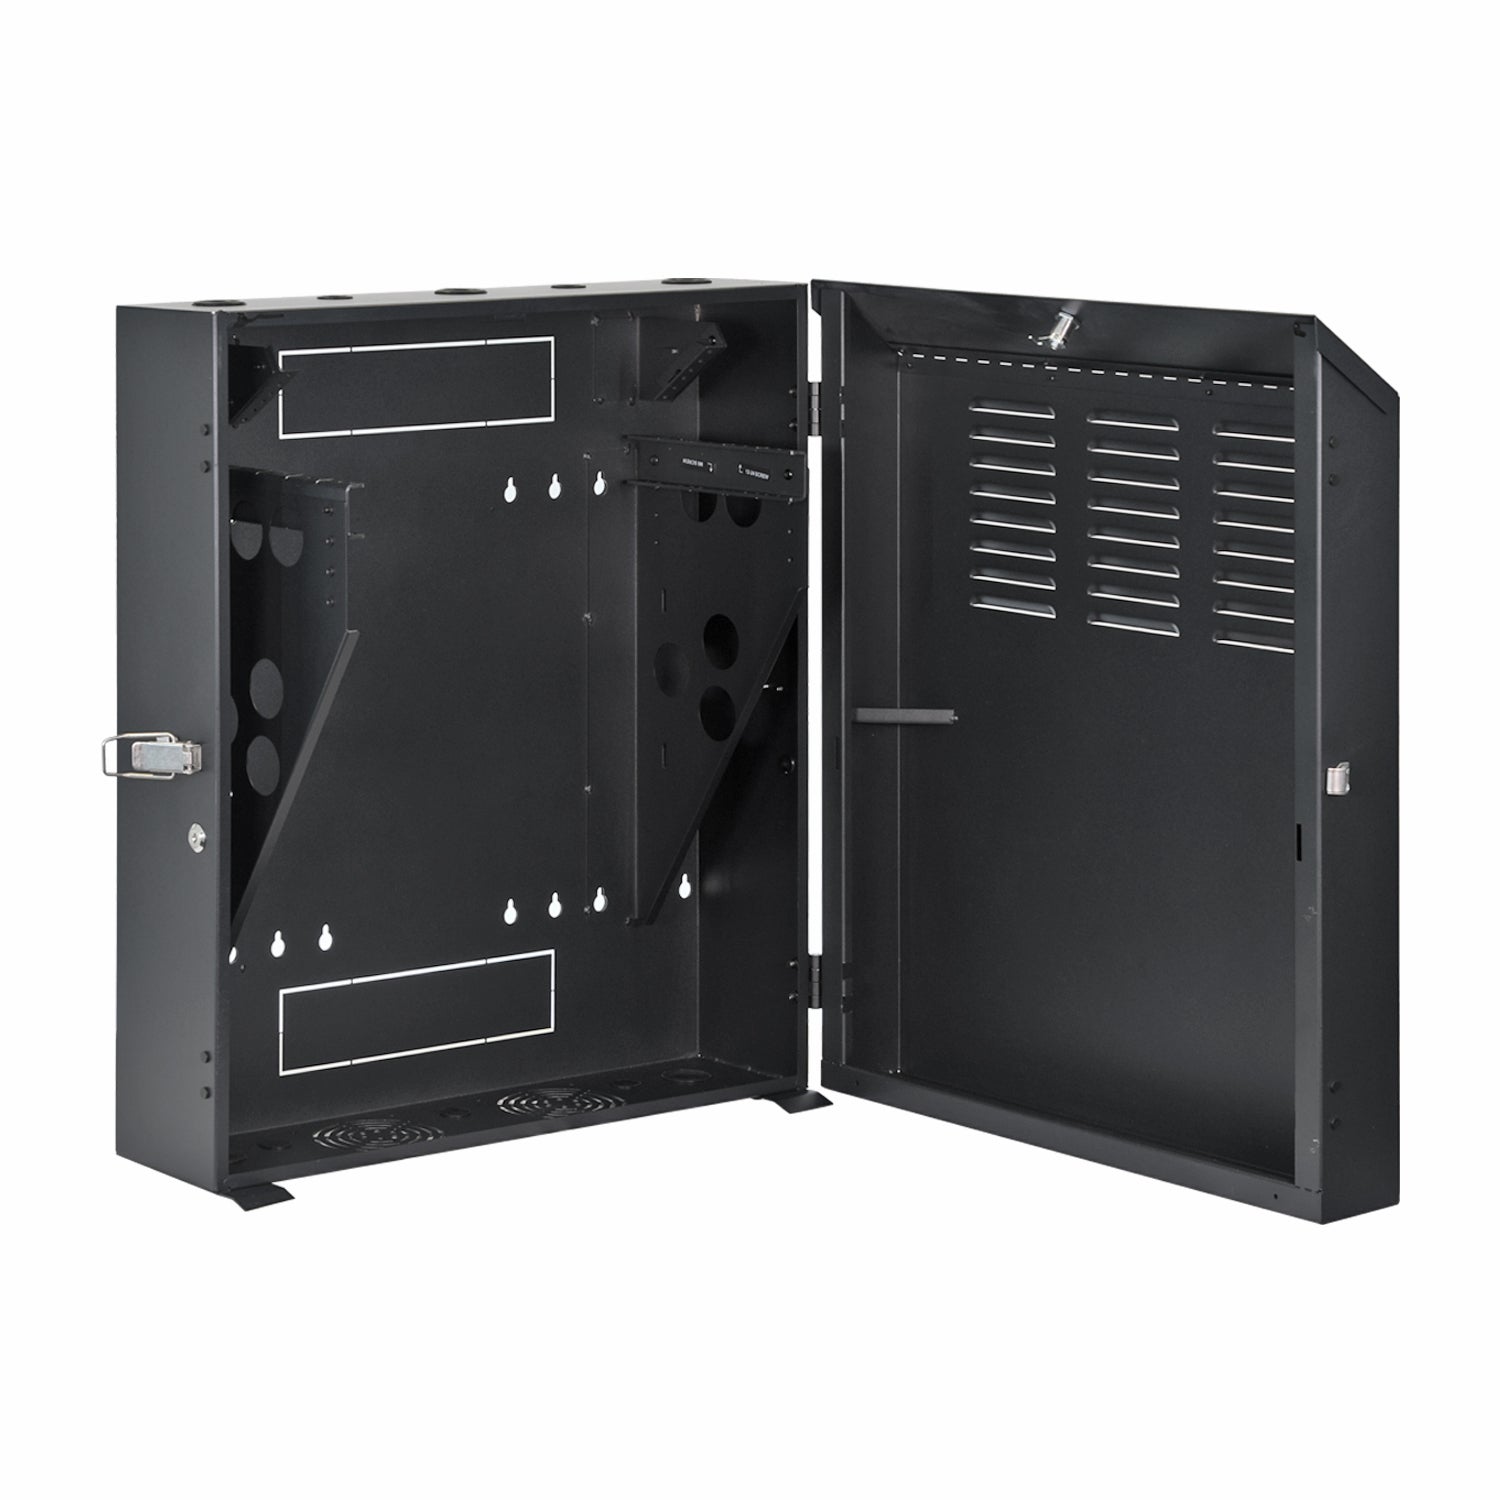 Wall-Mount Server-Depth Cabinets